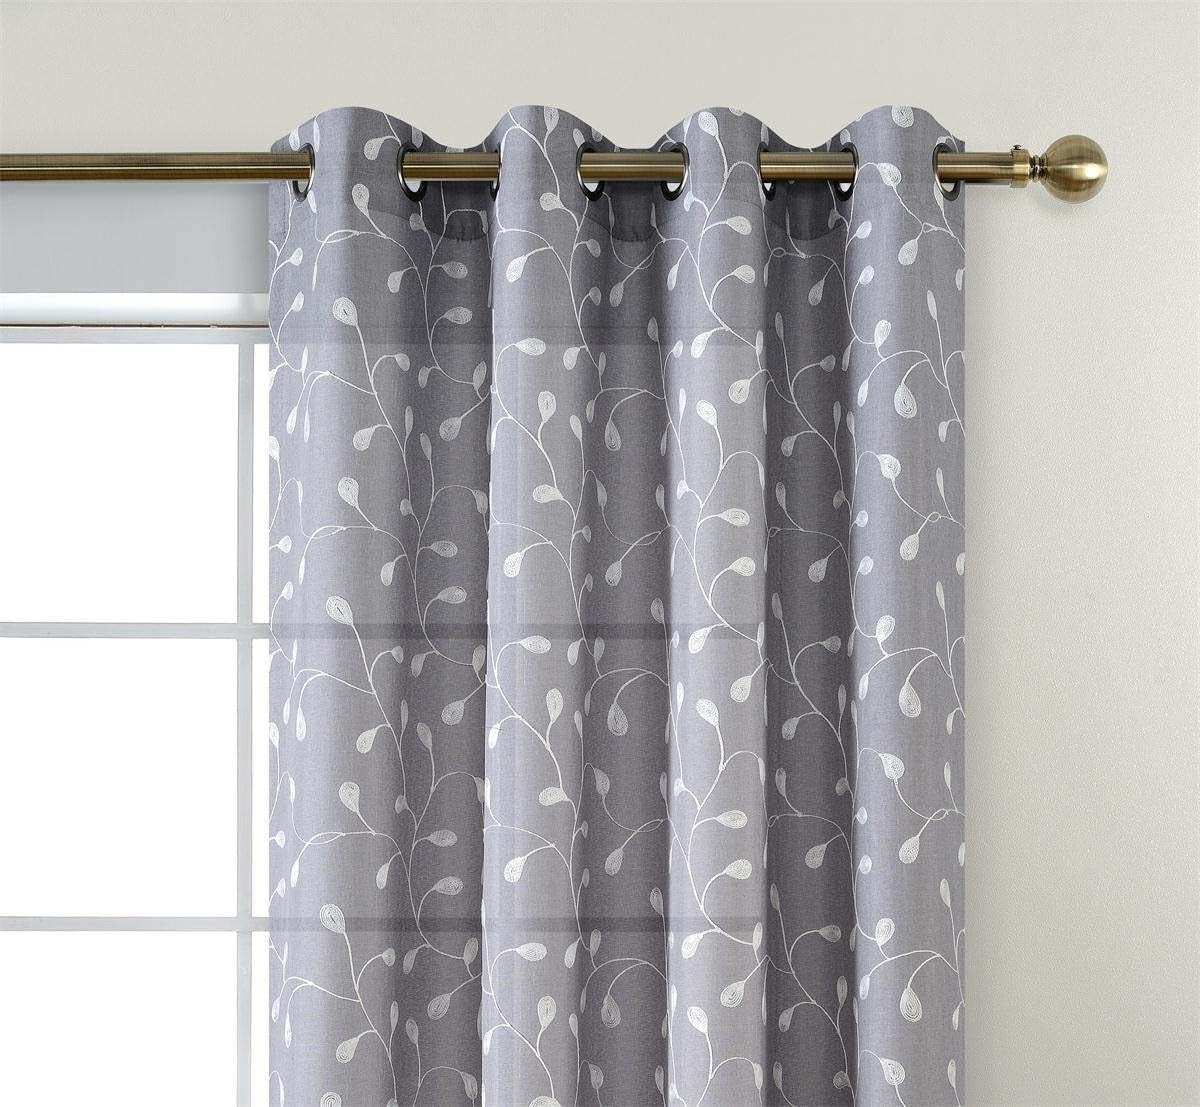 MIUCO Floral Embroidered Semi Sheer Curtains Faux Linen Grommet Curtains for Girls Room 52 X 84 Inch Set of 2, off White  MIUCO Grey 52X95 Inch 